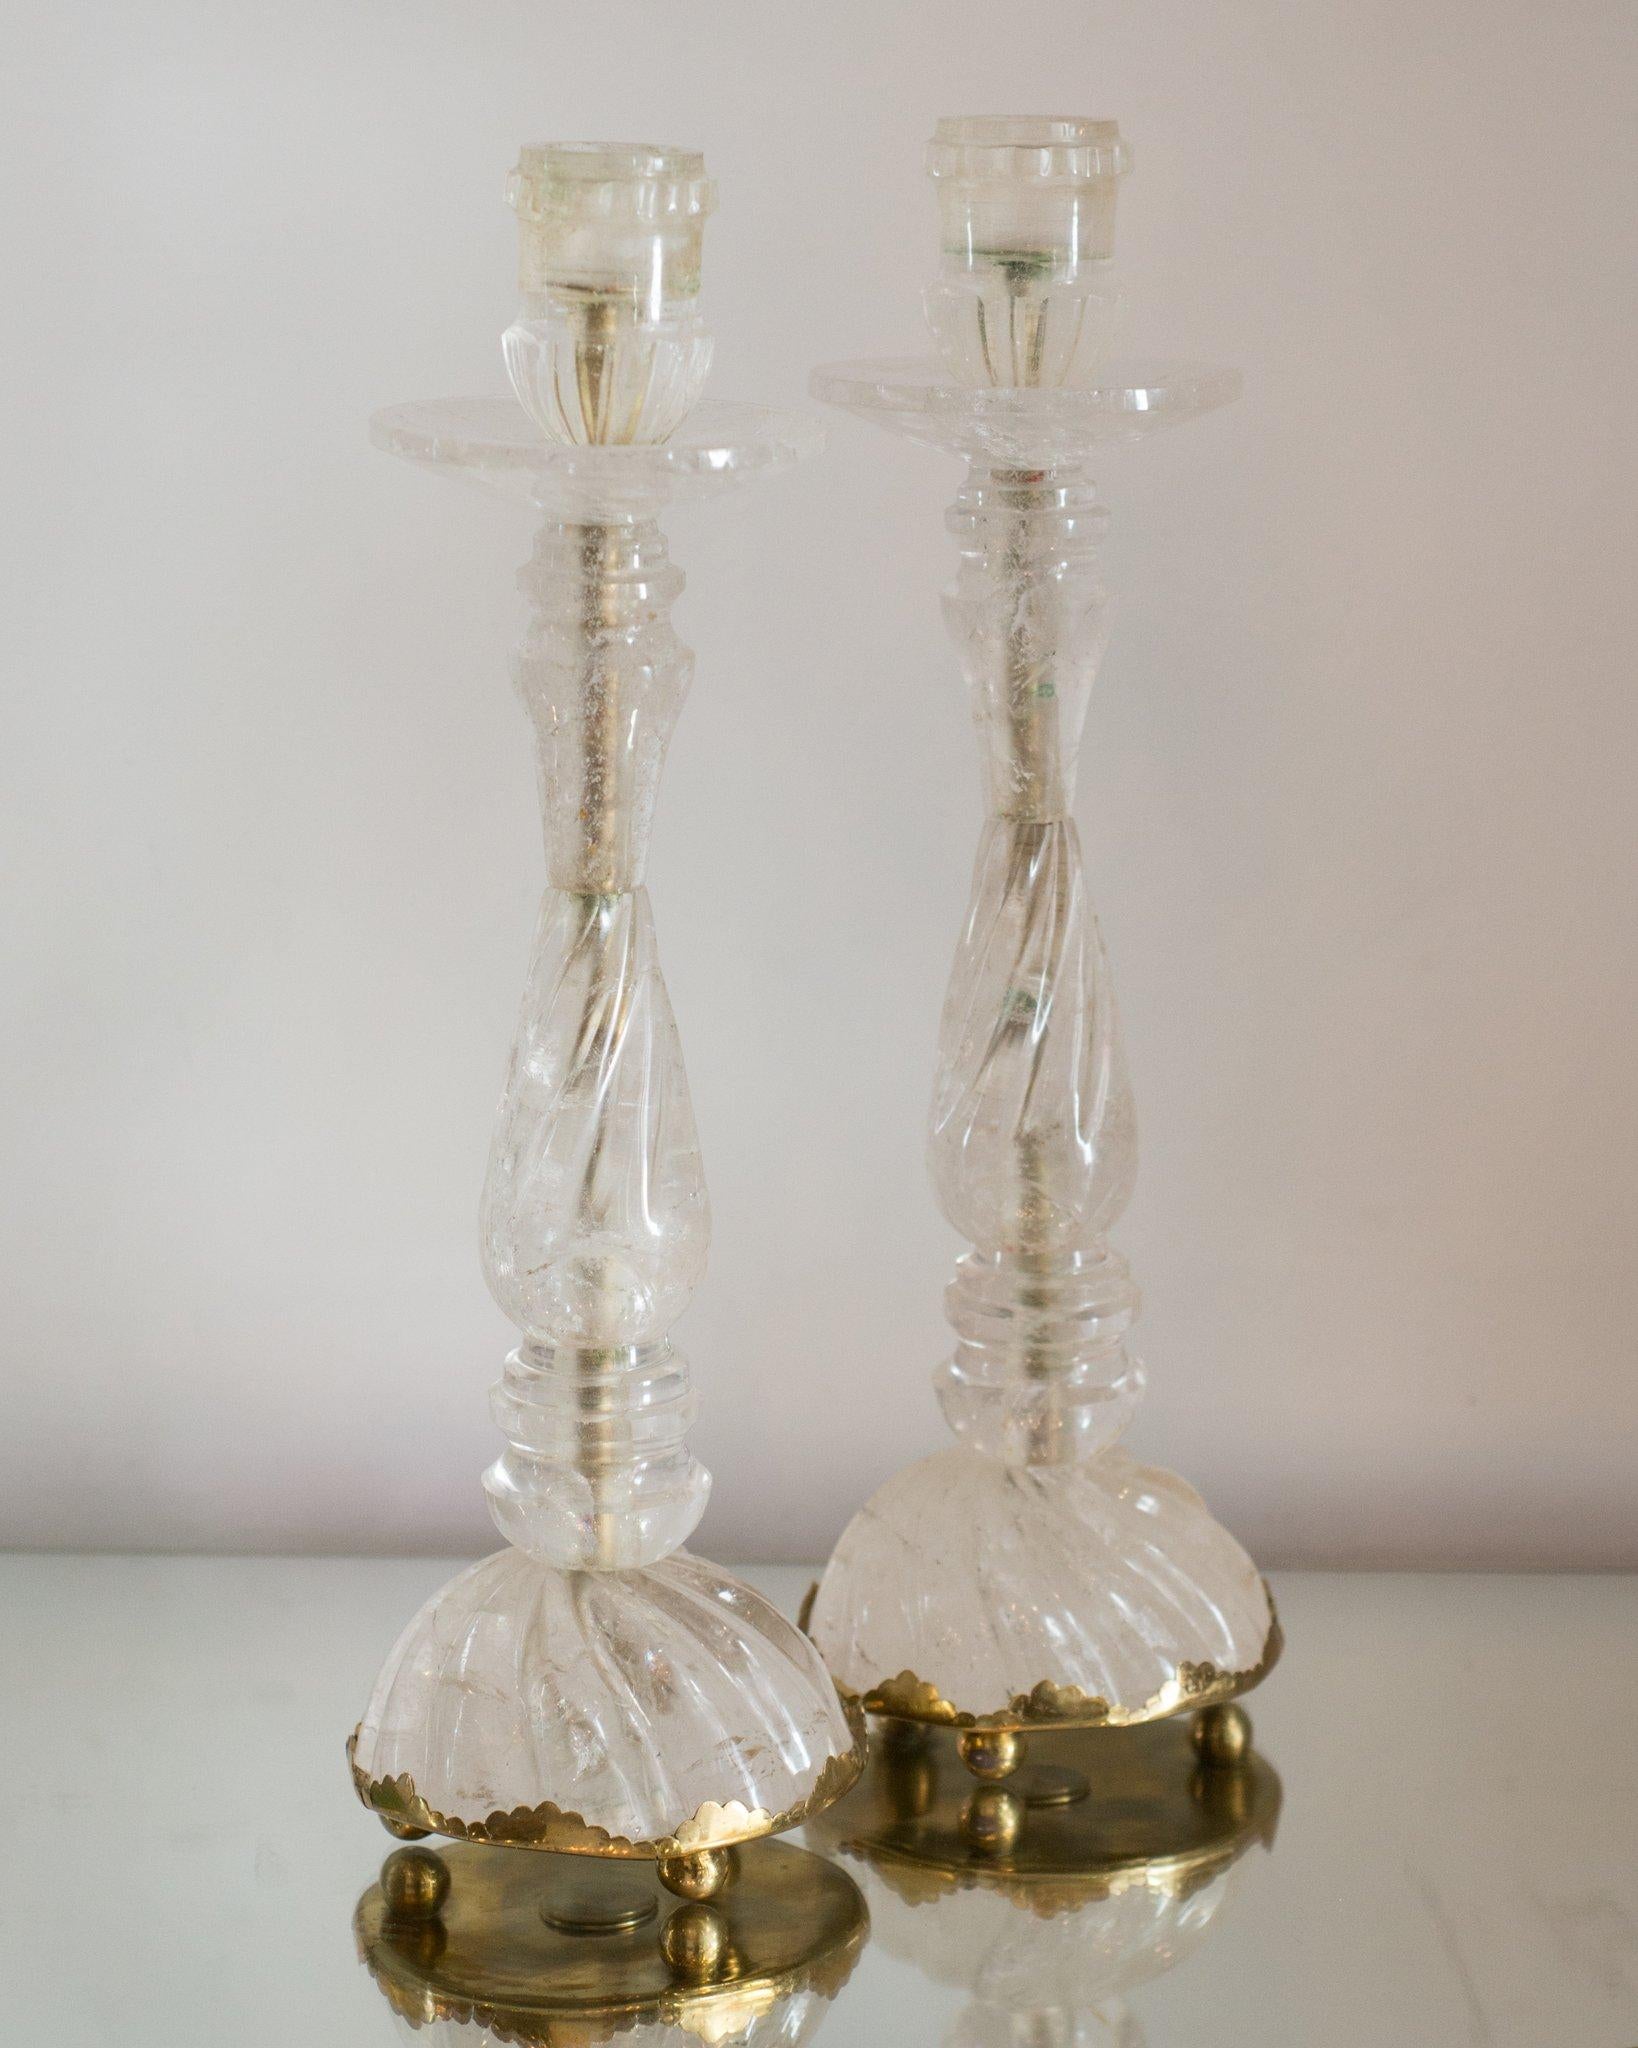 This pair of rock crystal and bronze candlesticks was sourced in Paris. Rock crystal has long been used in decoration and many ornate pieces are exhibited in museums around the world. These elegant candlesticks would suit a traditional or a